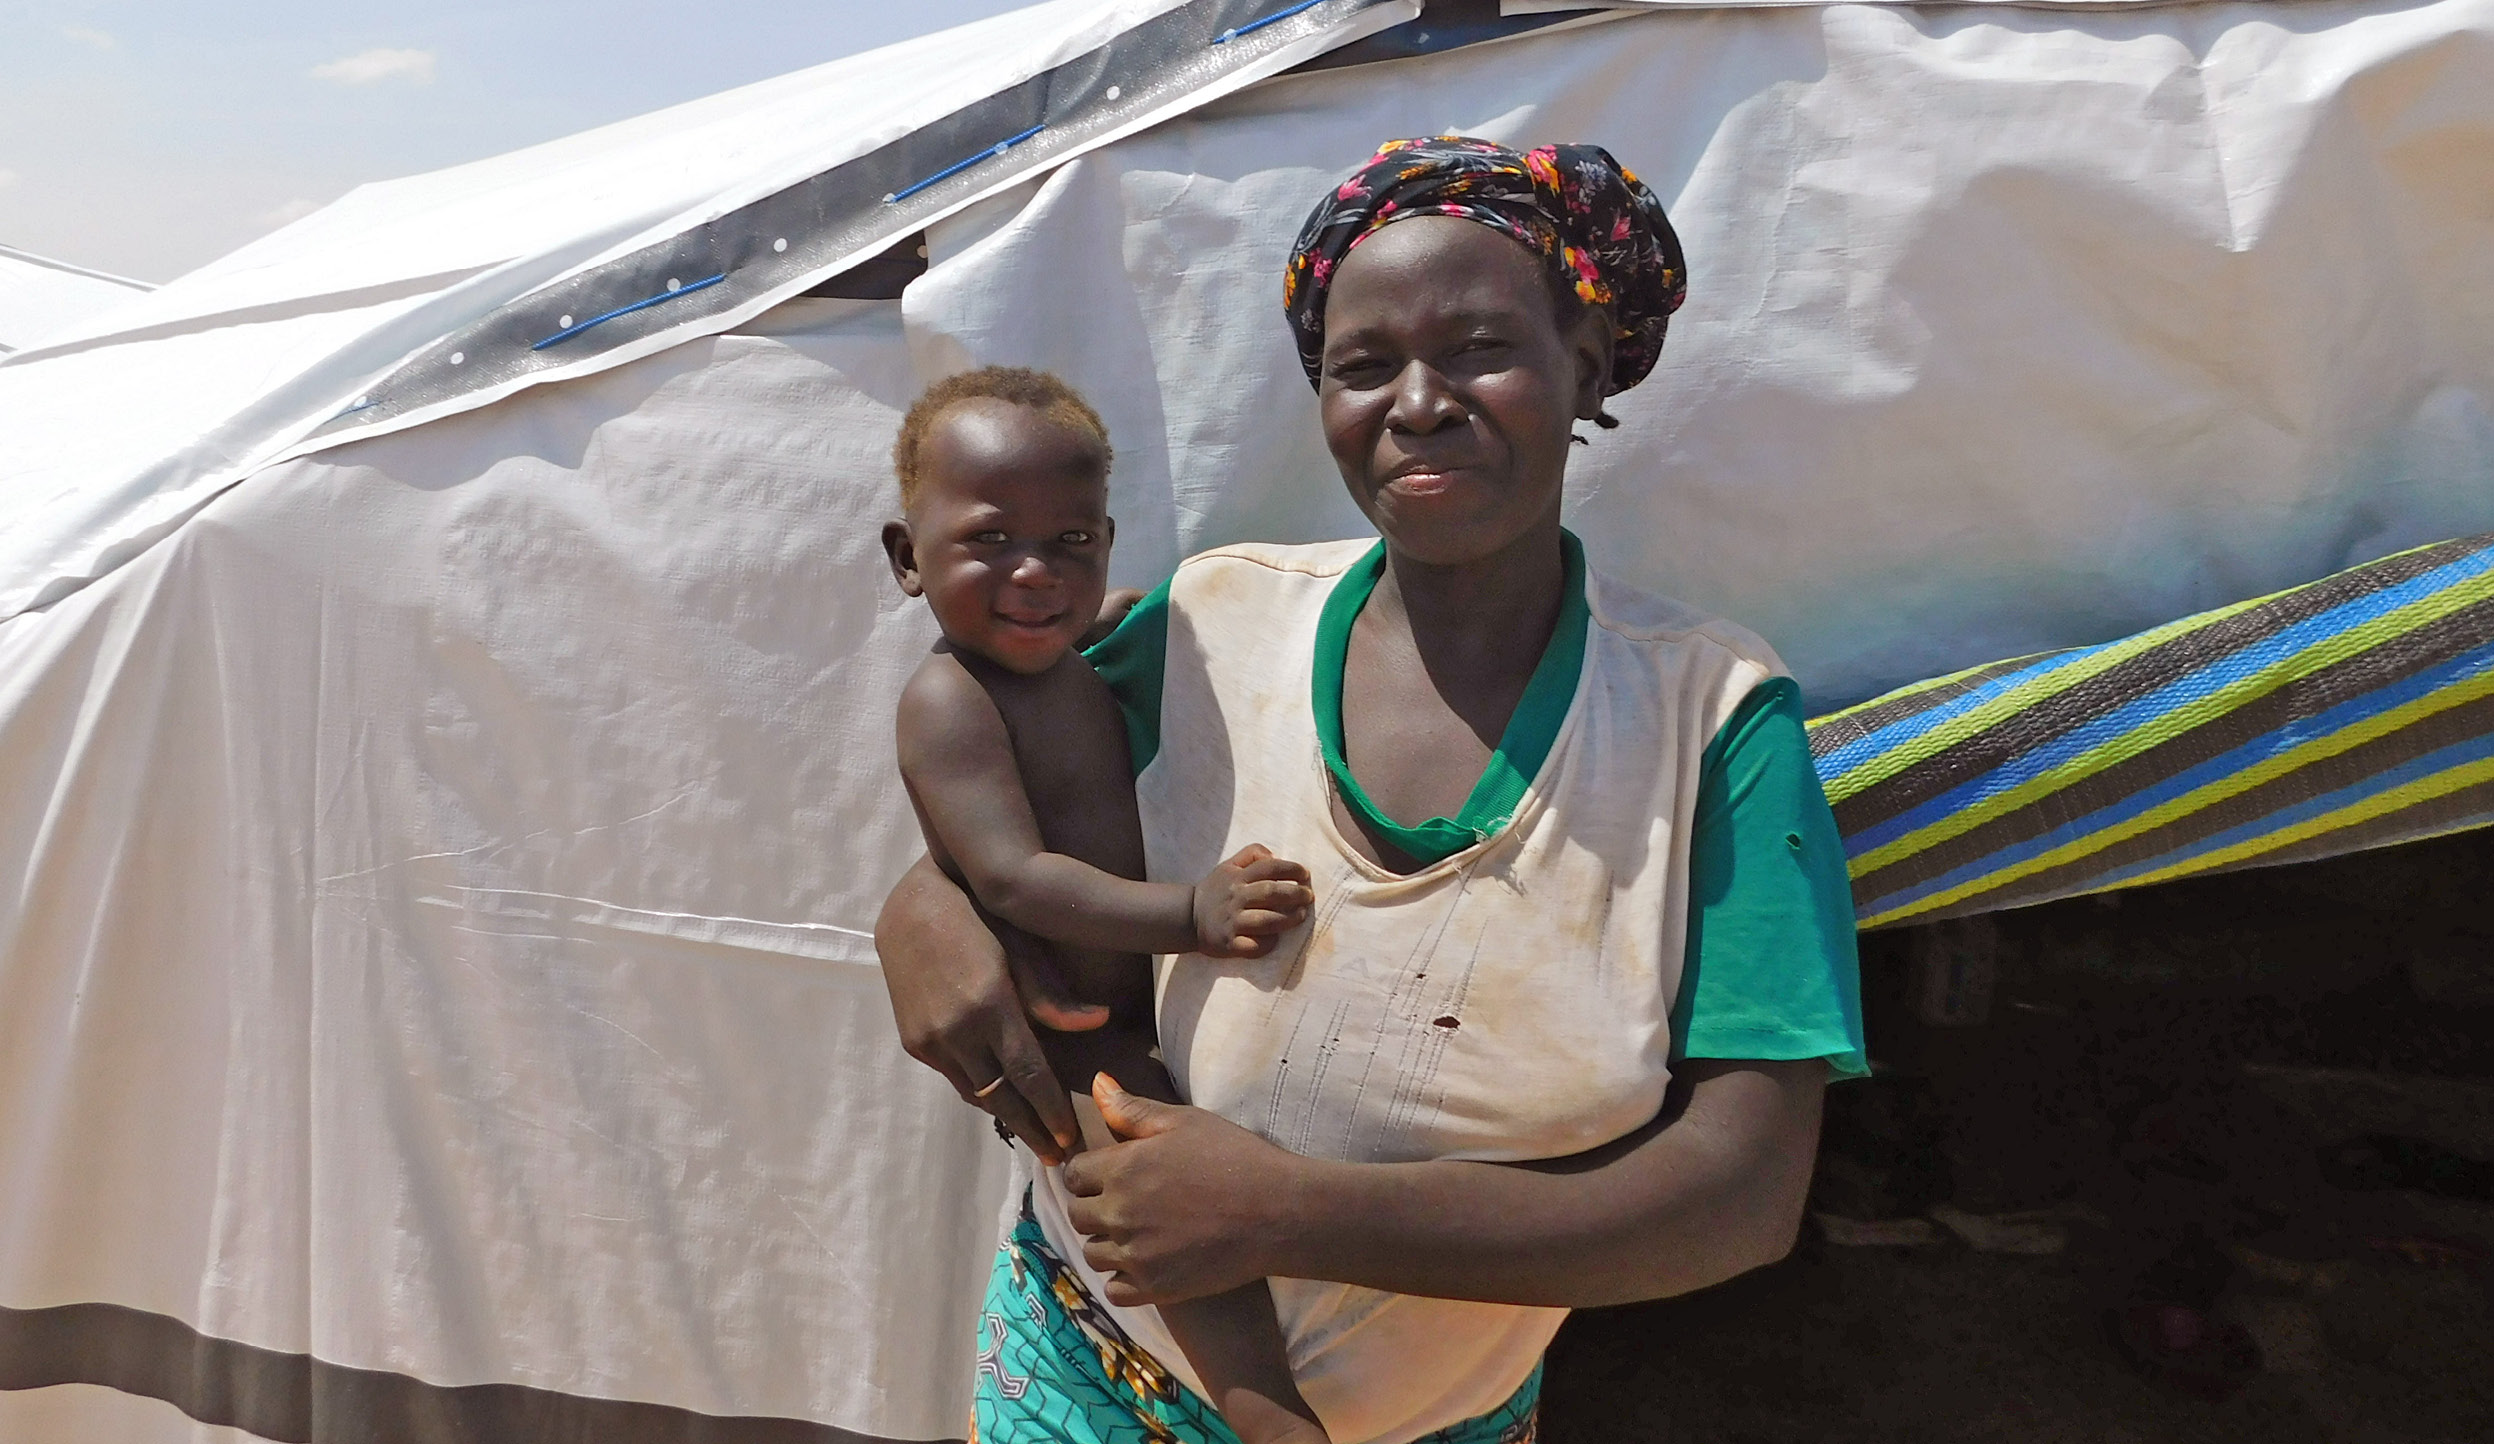 Woman outside tent holding smiling child